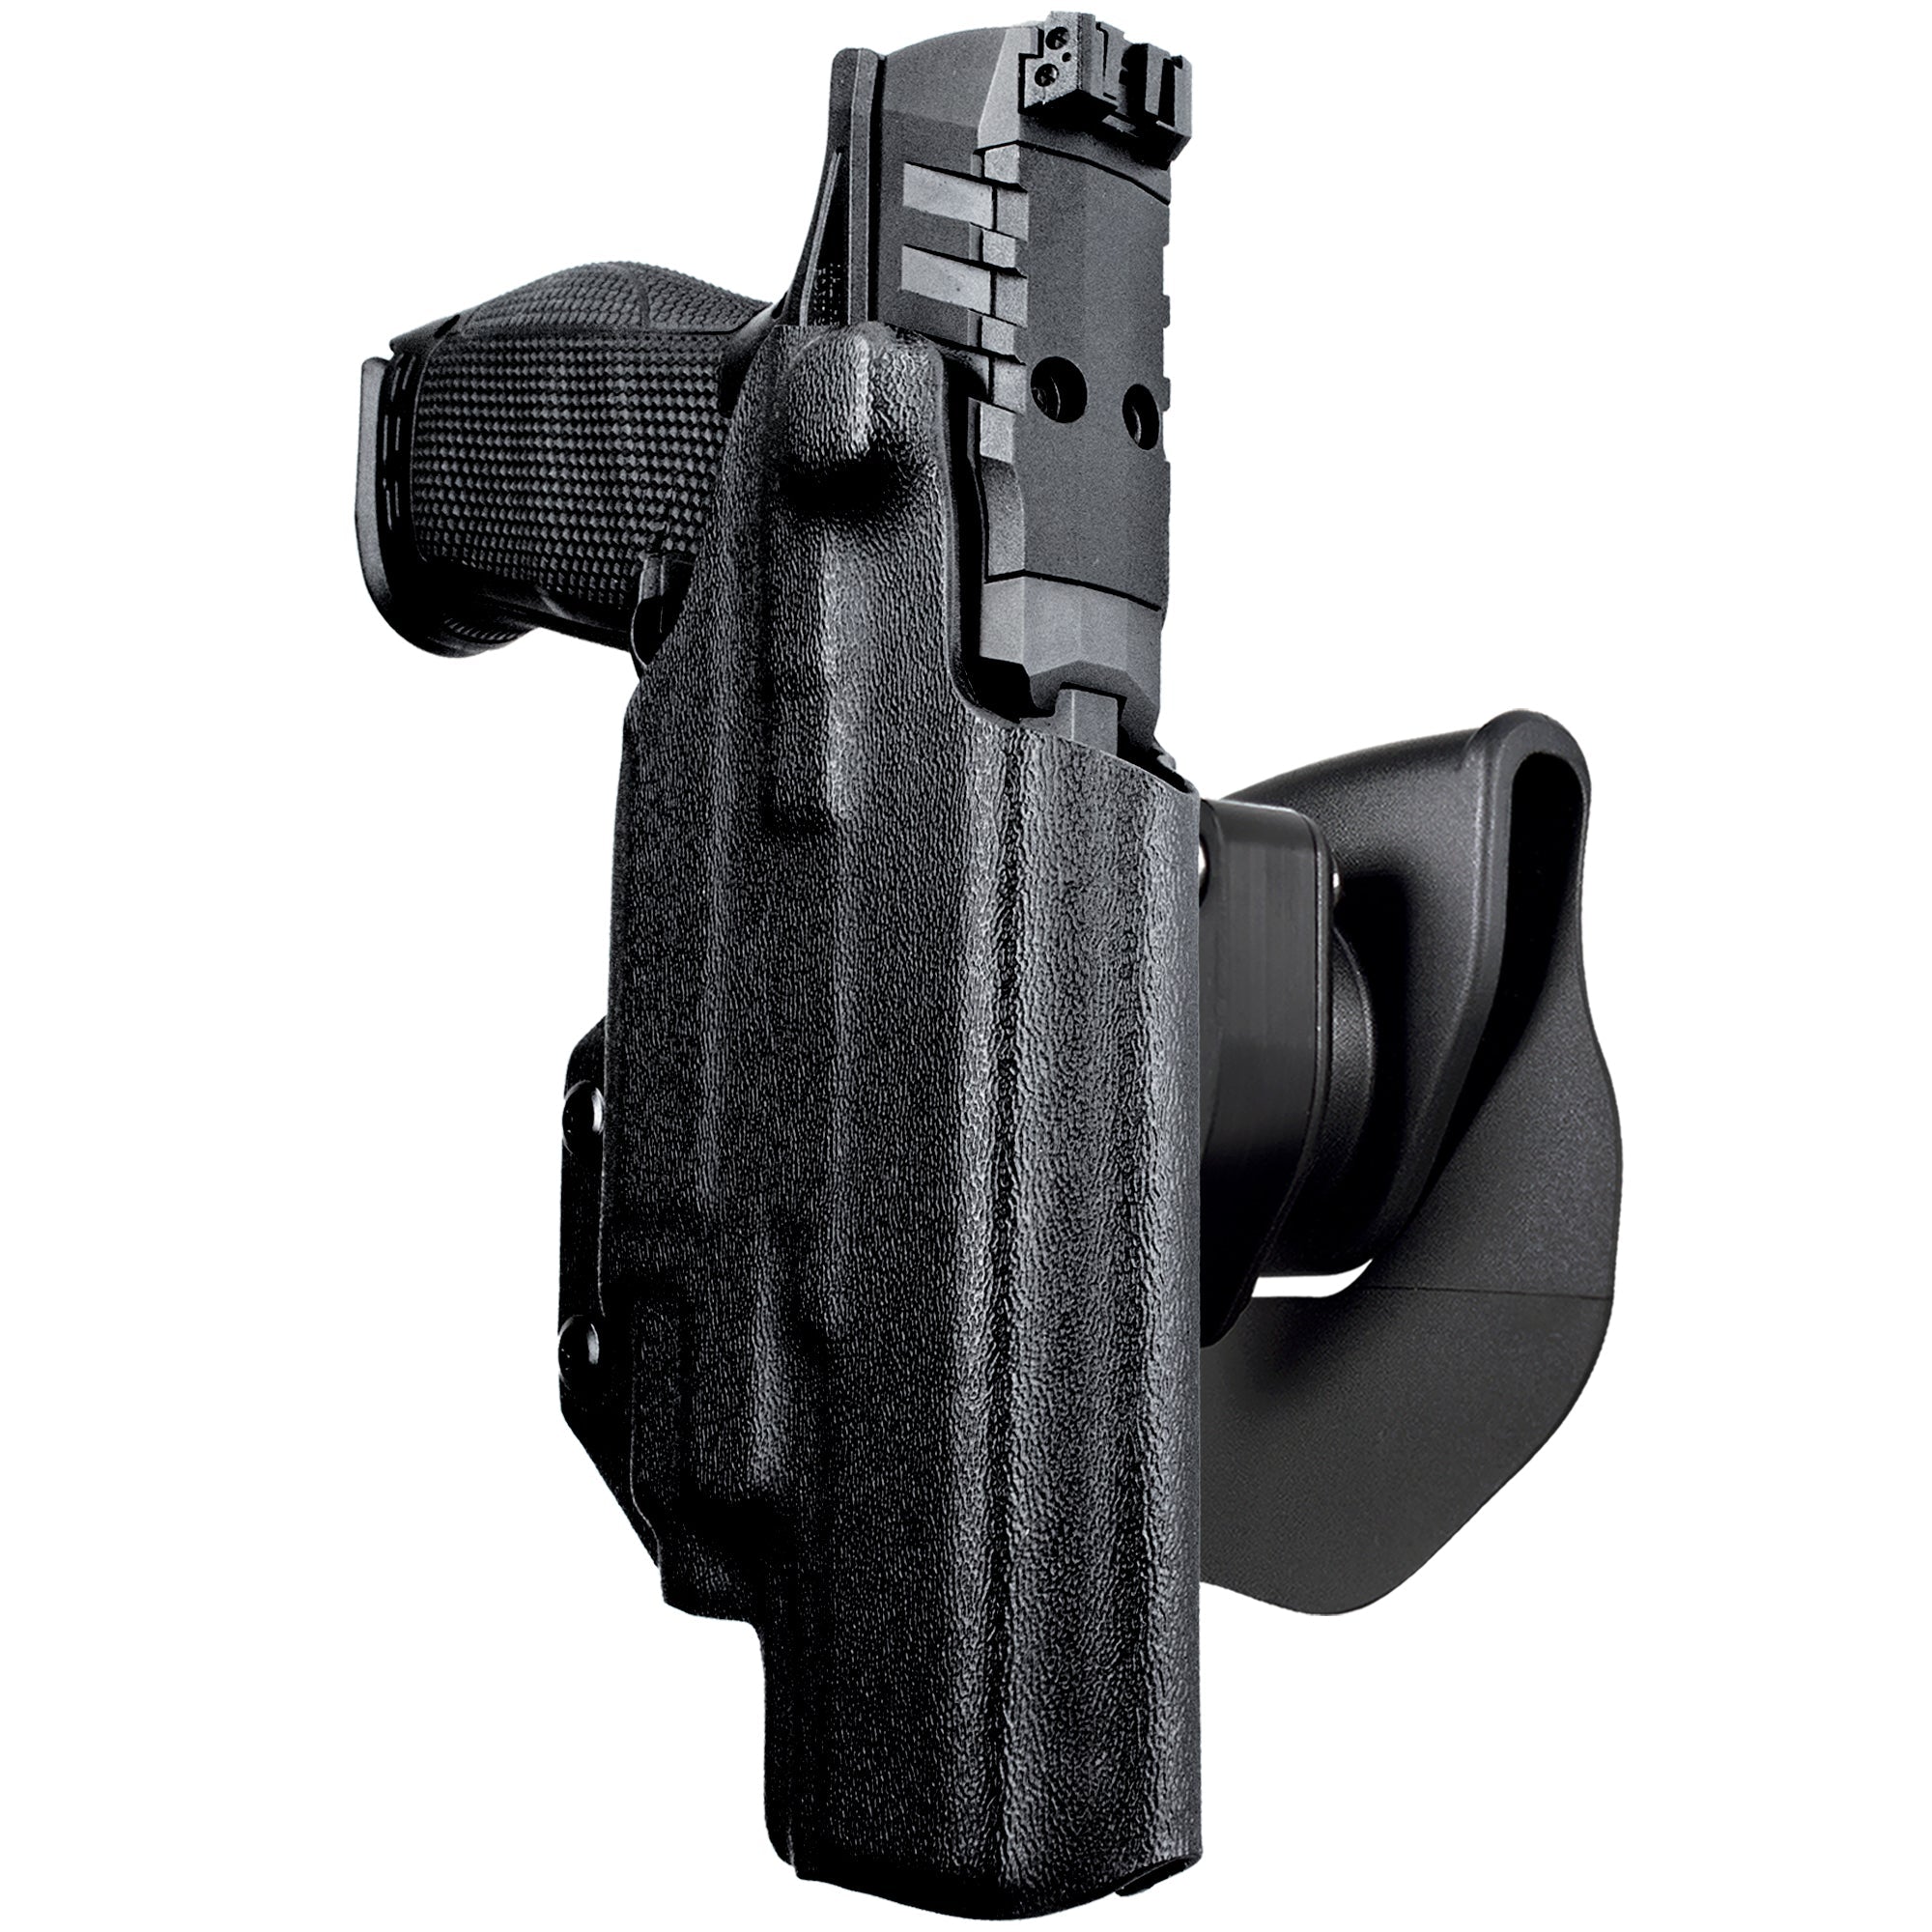 OWB Quick Release Paddle Holster in Black